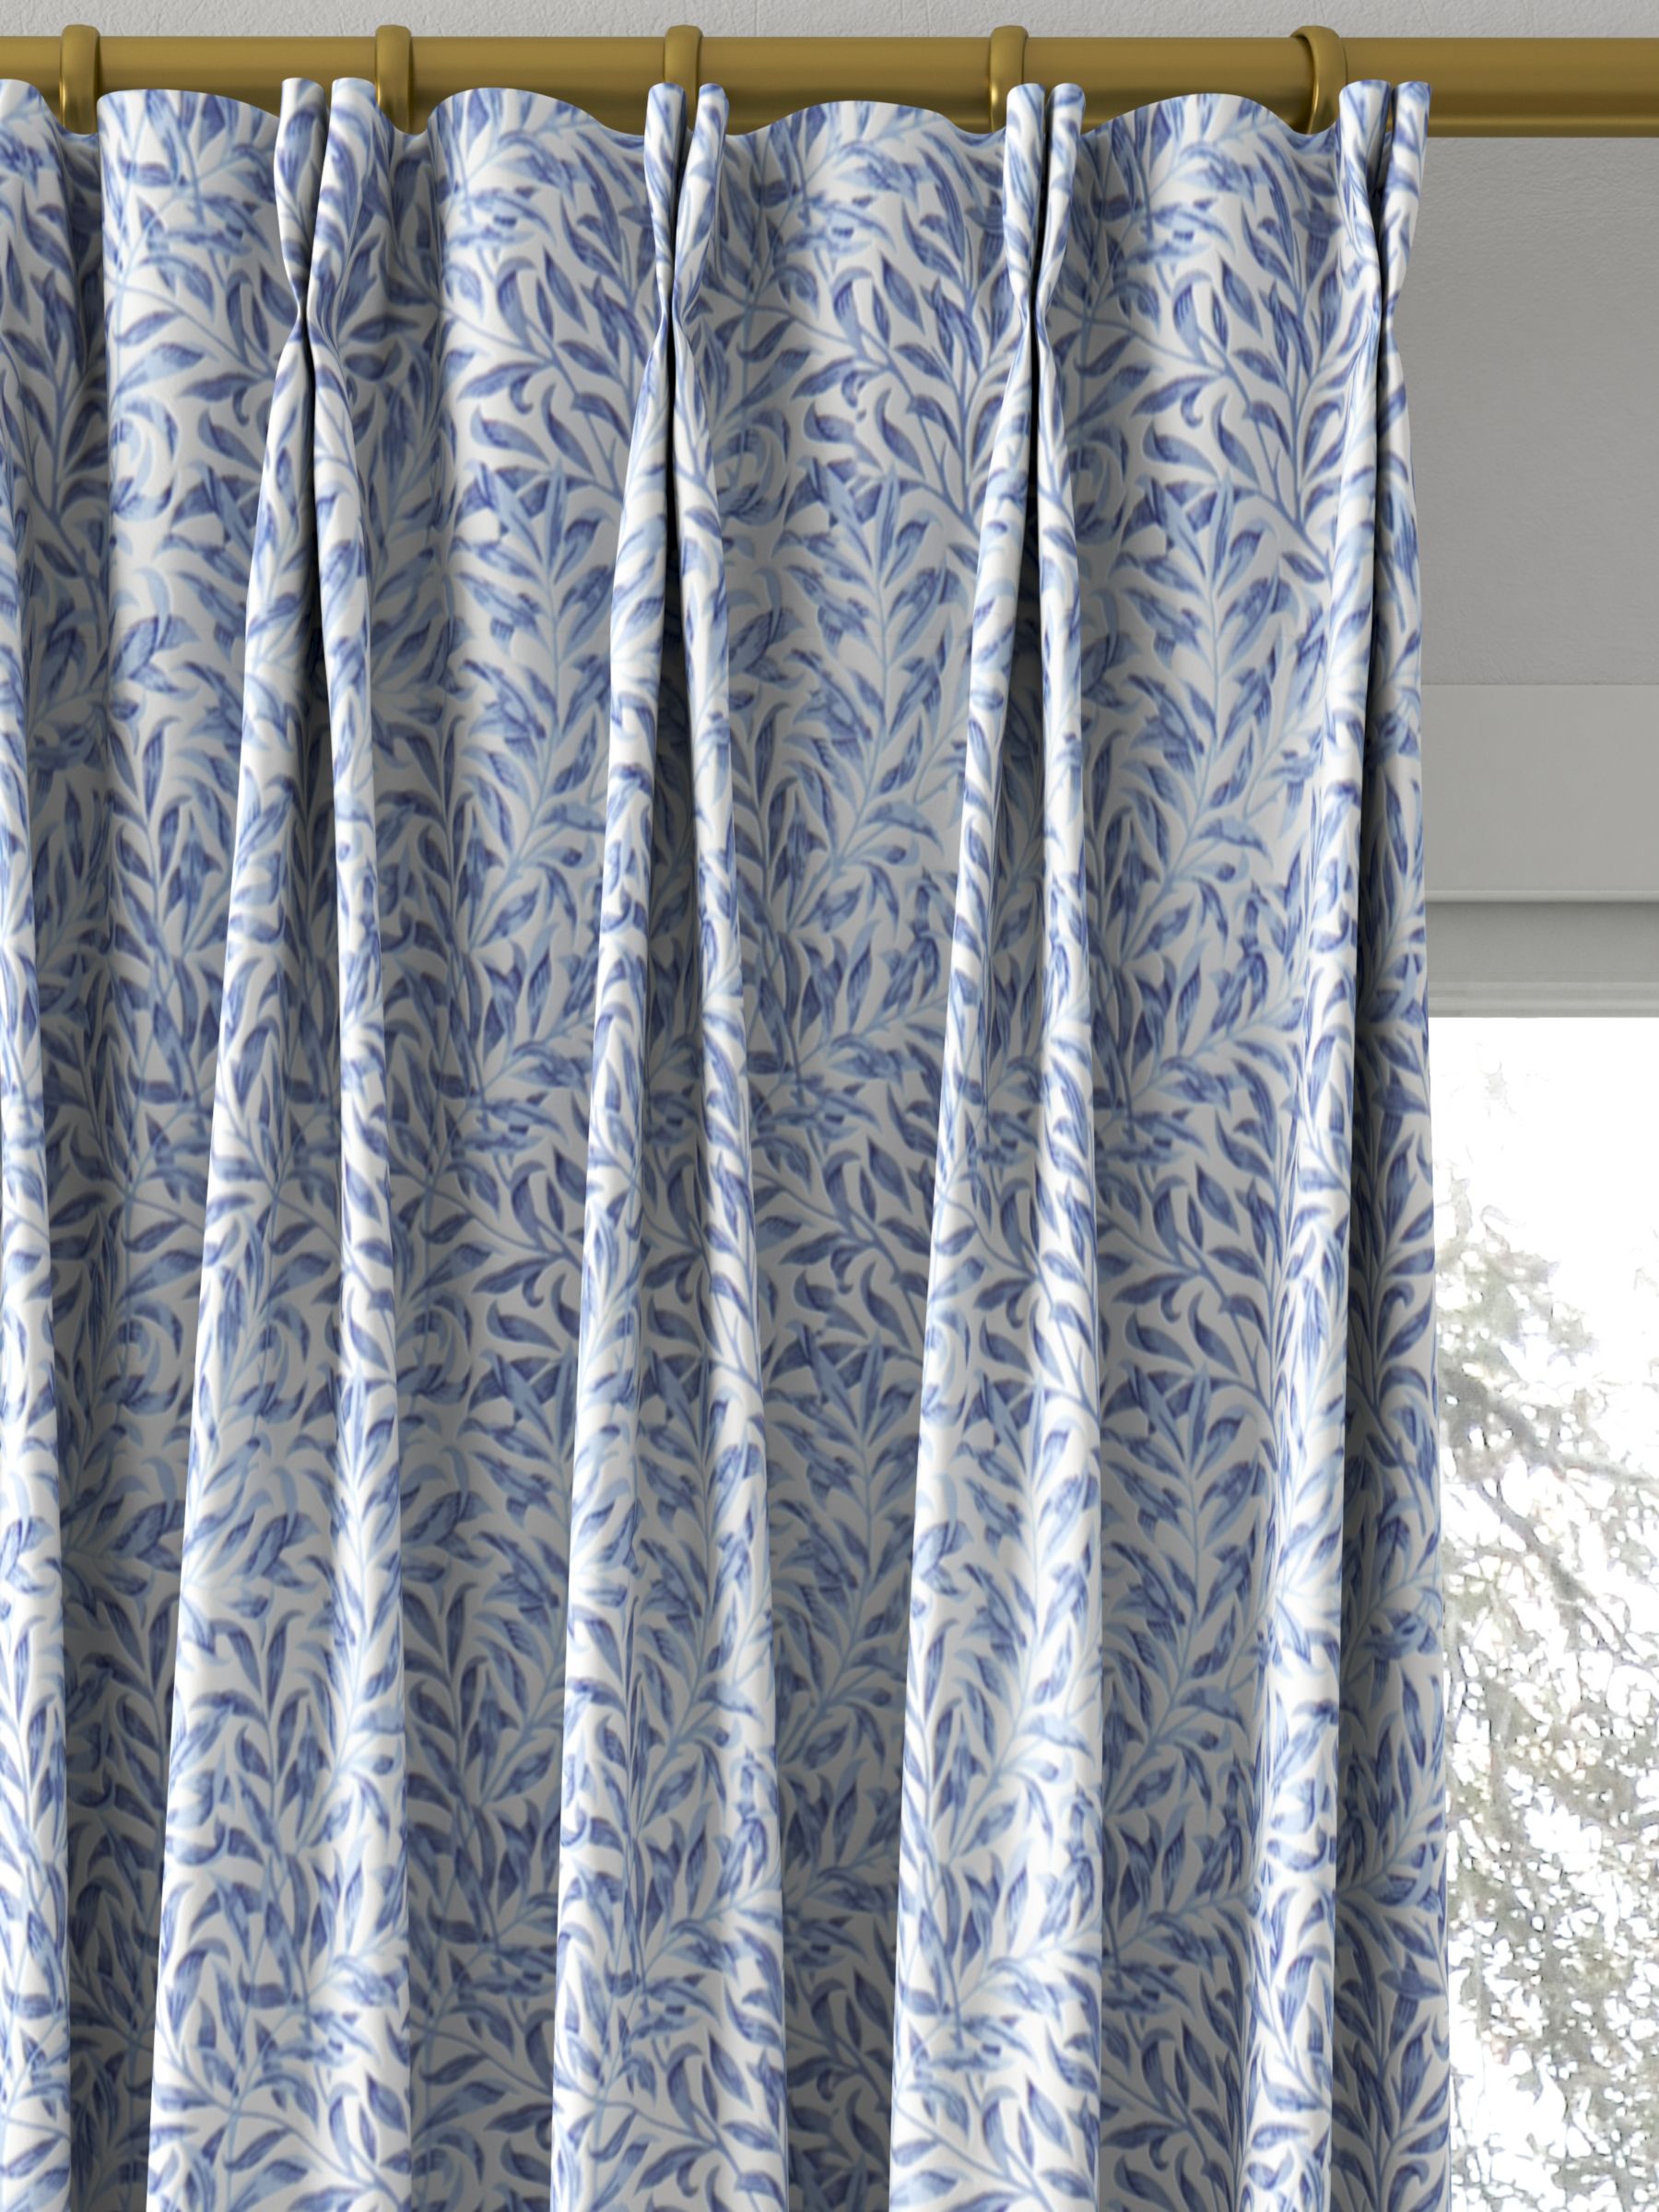 Morris & Co. Willow Boughs Minor Made to Measure Curtains, Blue